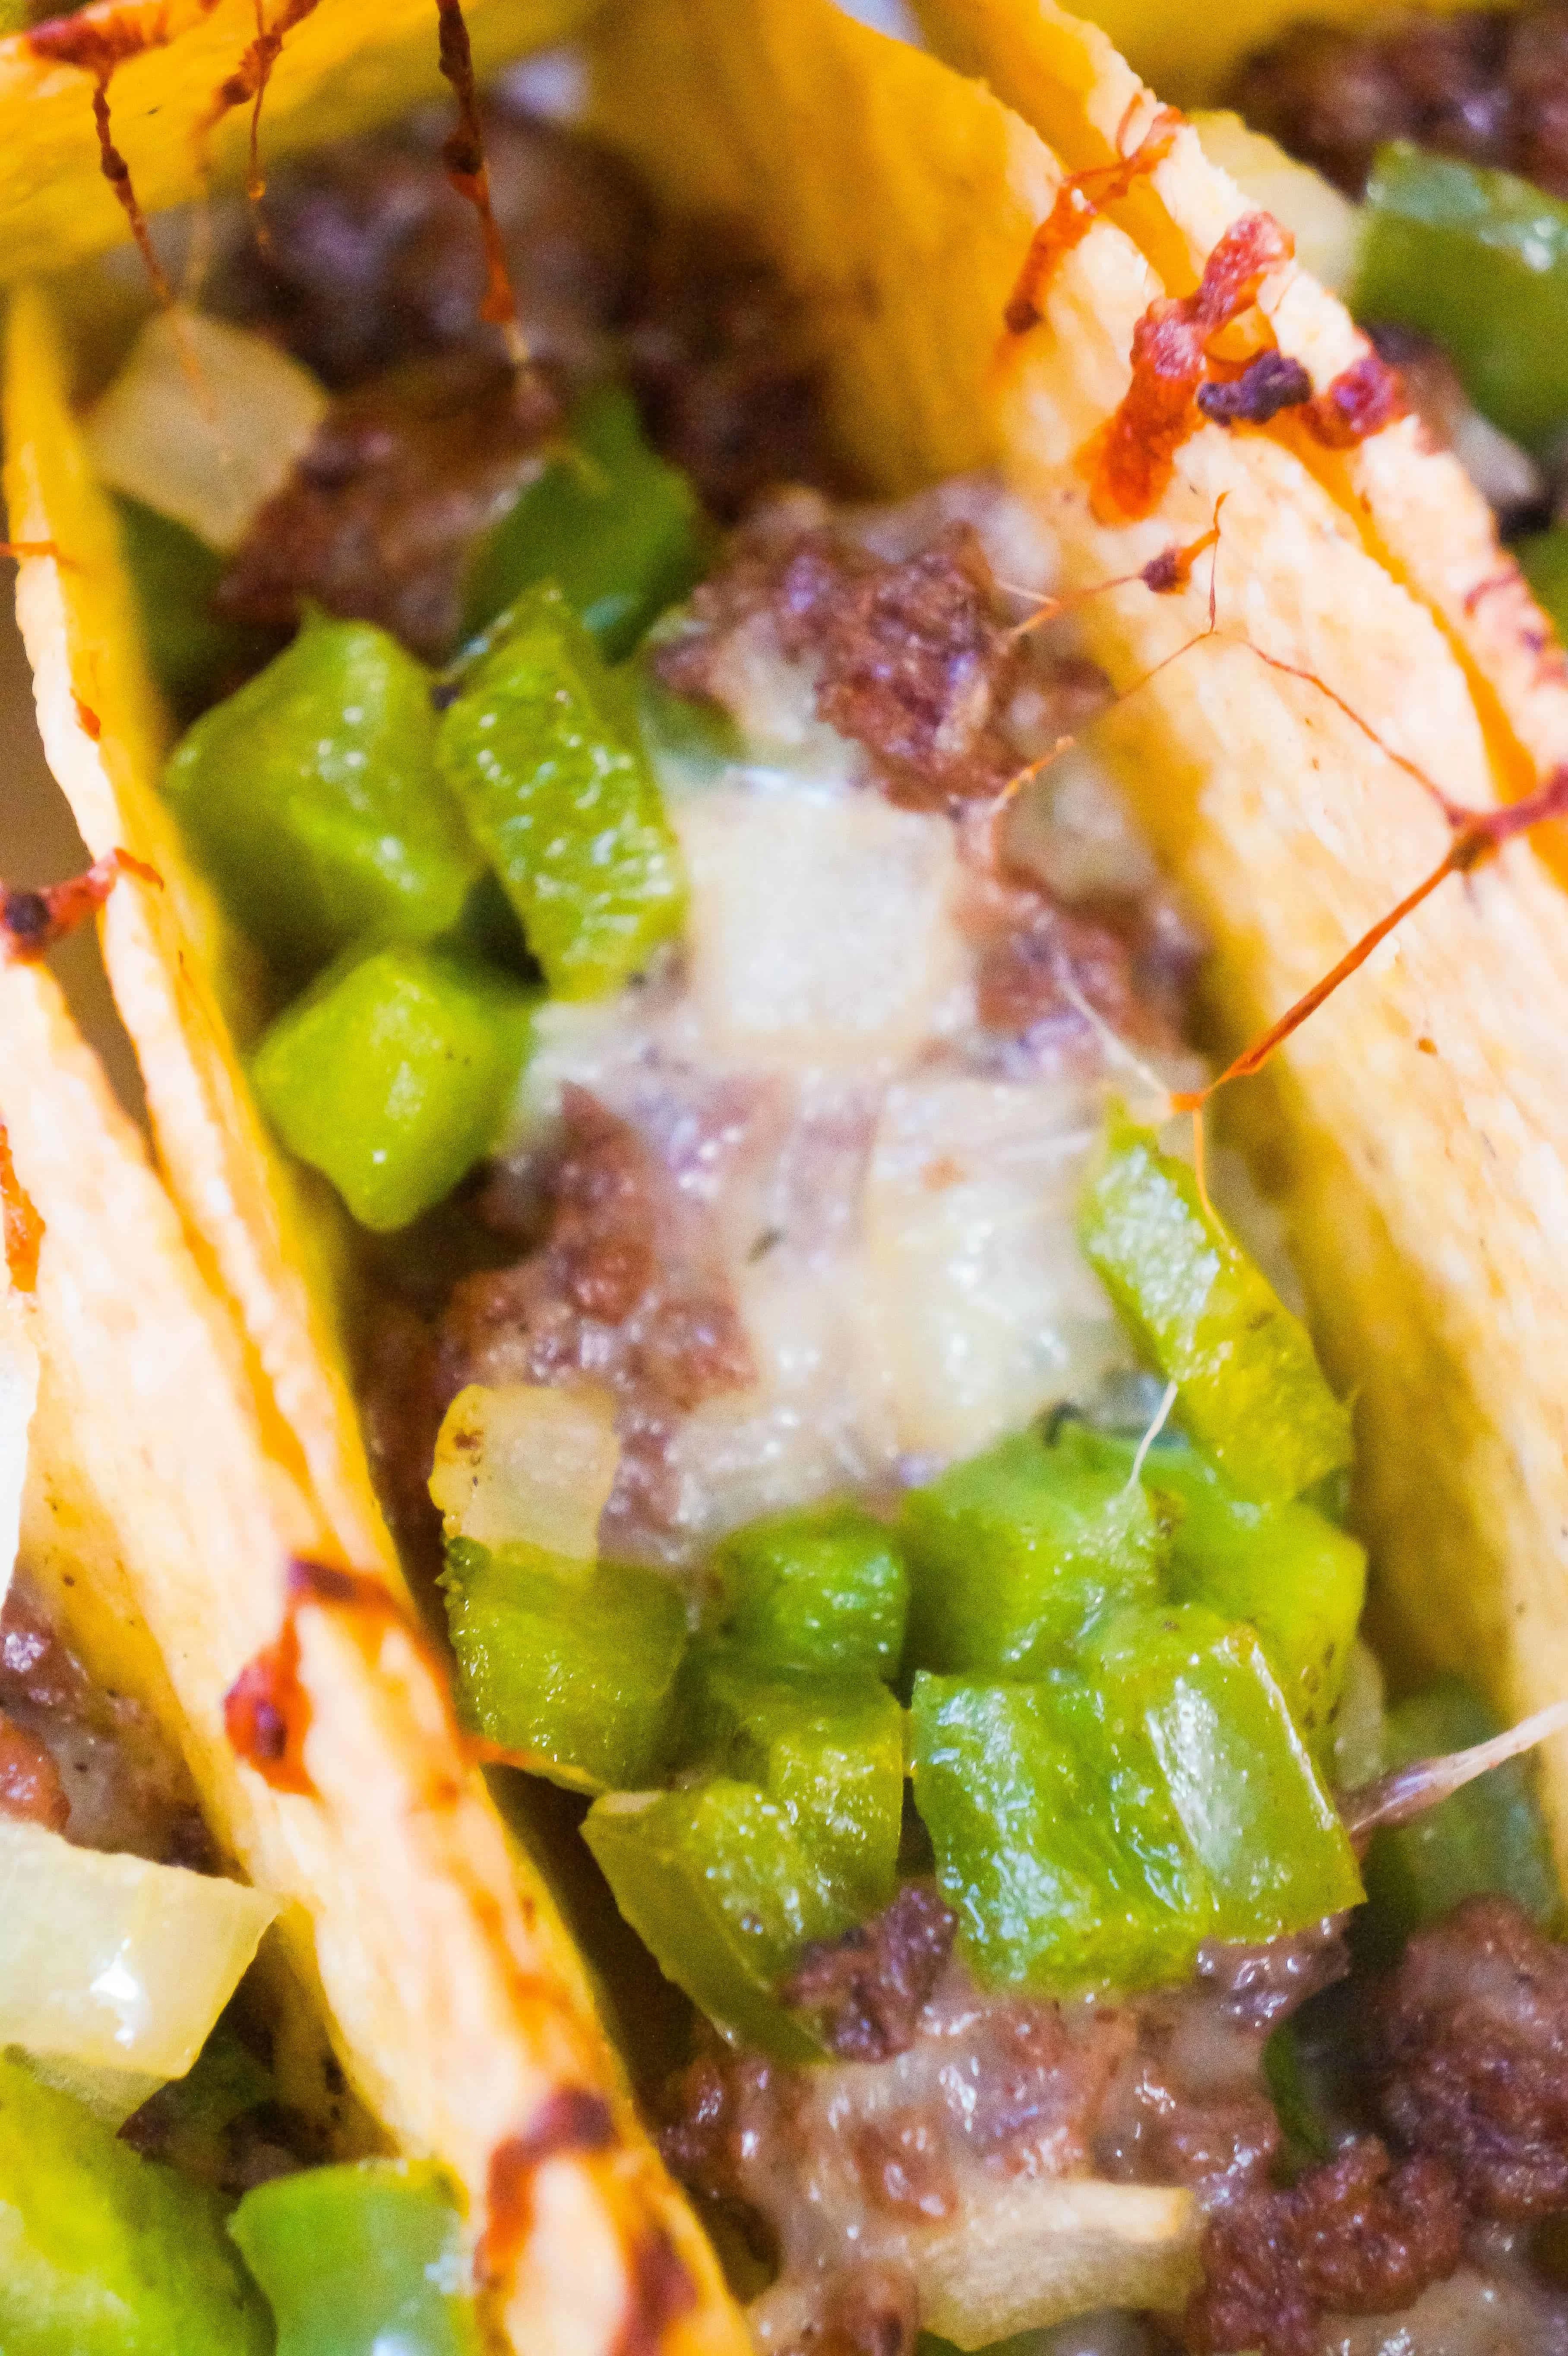 Philly Cheese Steak Ground Beef Tacos are the perfect party food for Super Bowl Sunday.